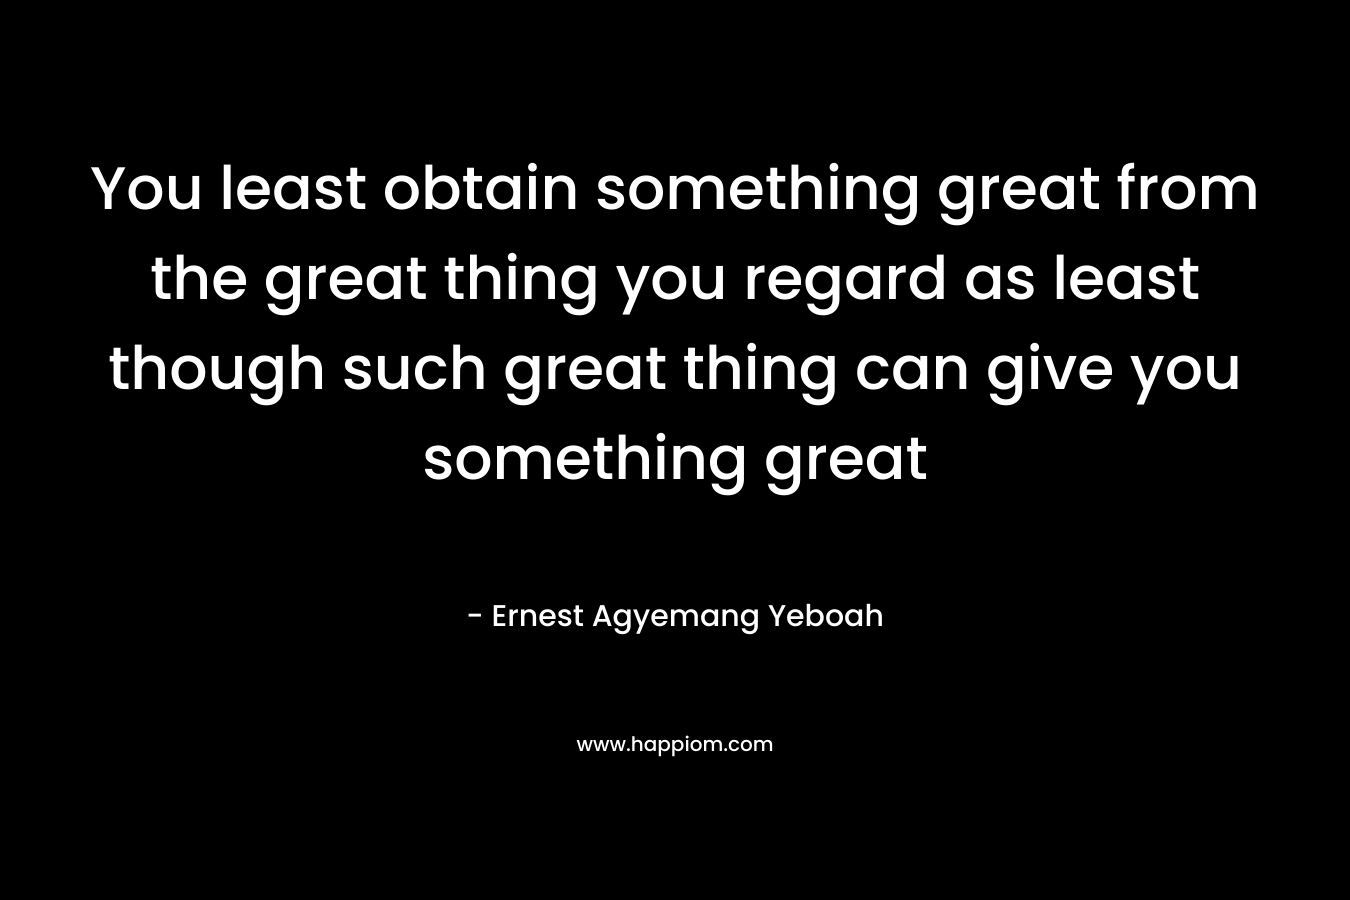 You least obtain something great from the great thing you regard as least though such great thing can give you something great